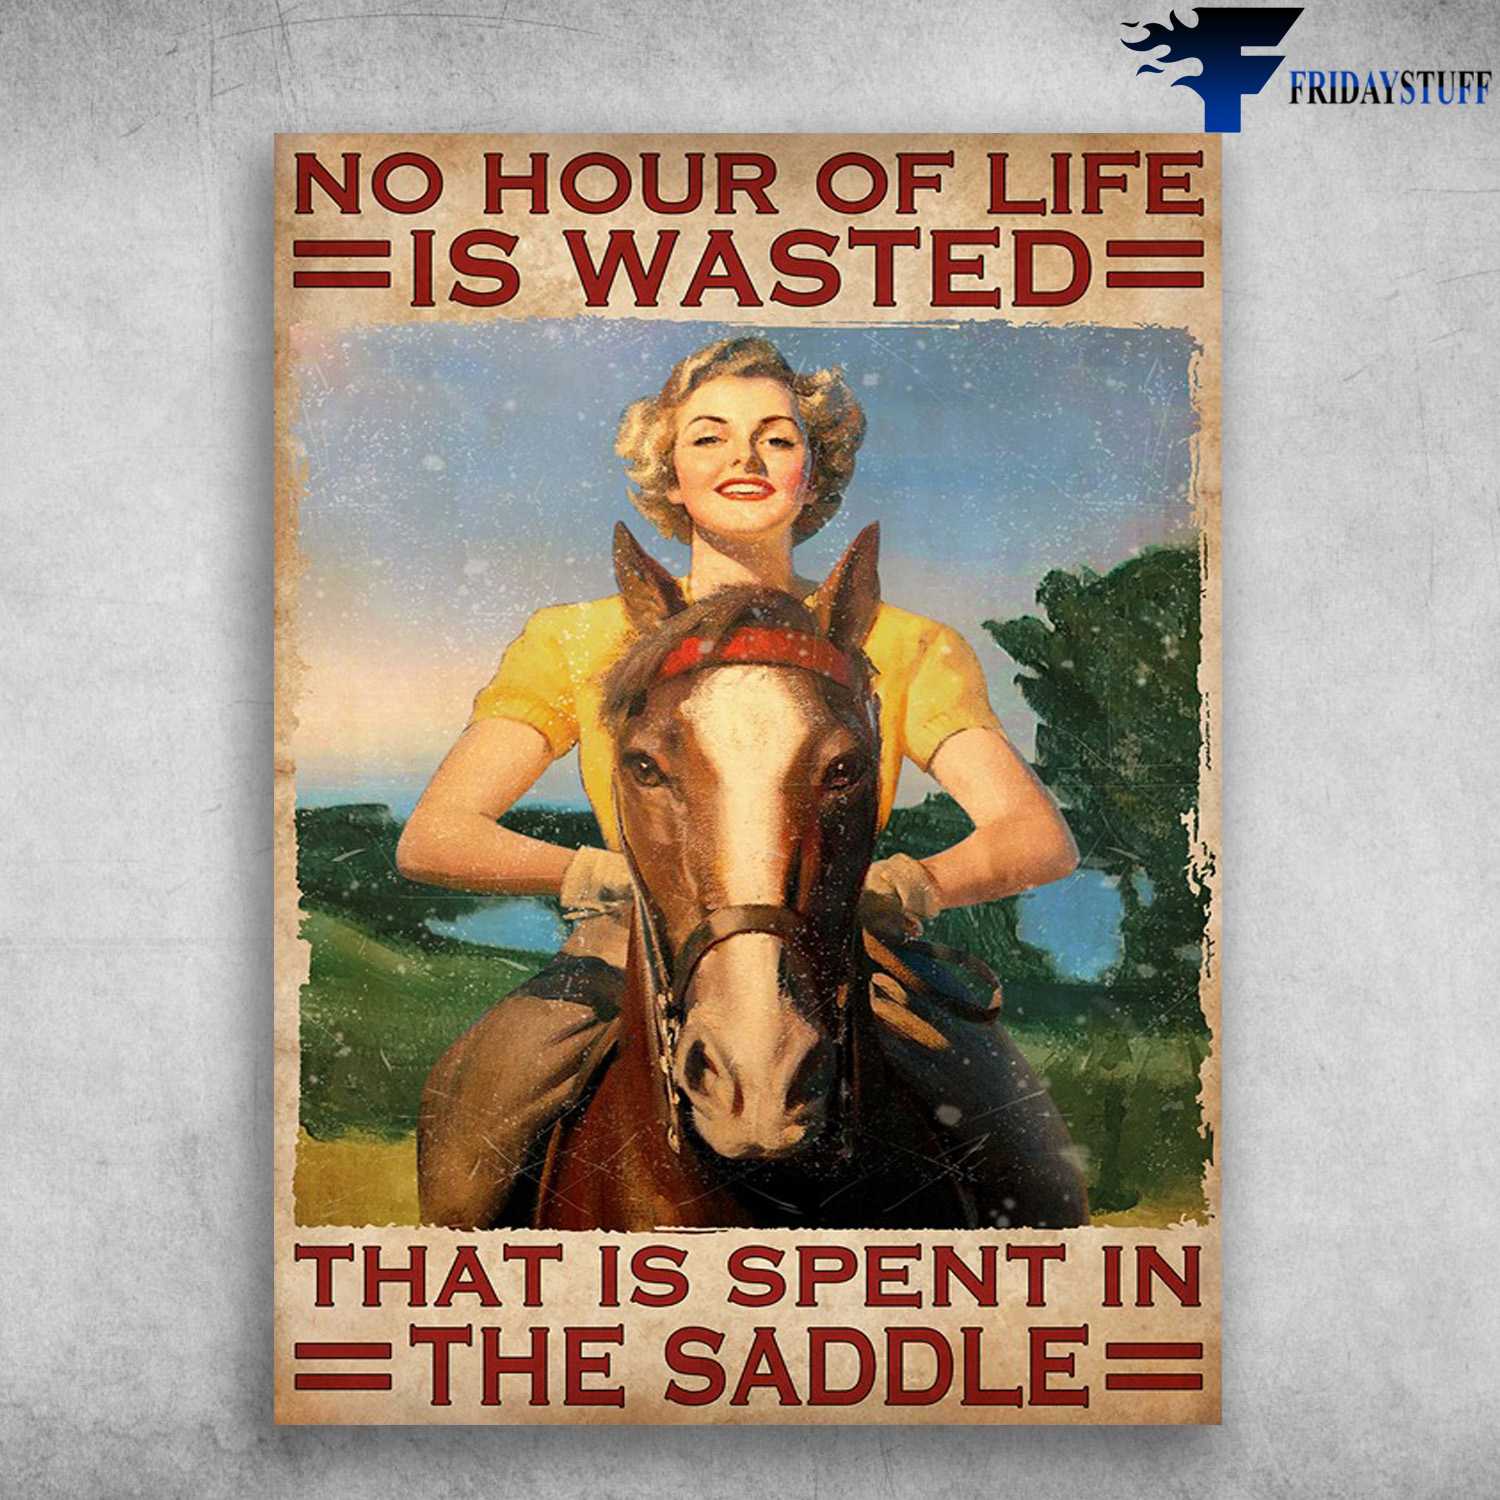 Horse Riding, Horse Lover - No Hour Of Life, Is Wasted, That Is Spent In The Saddle